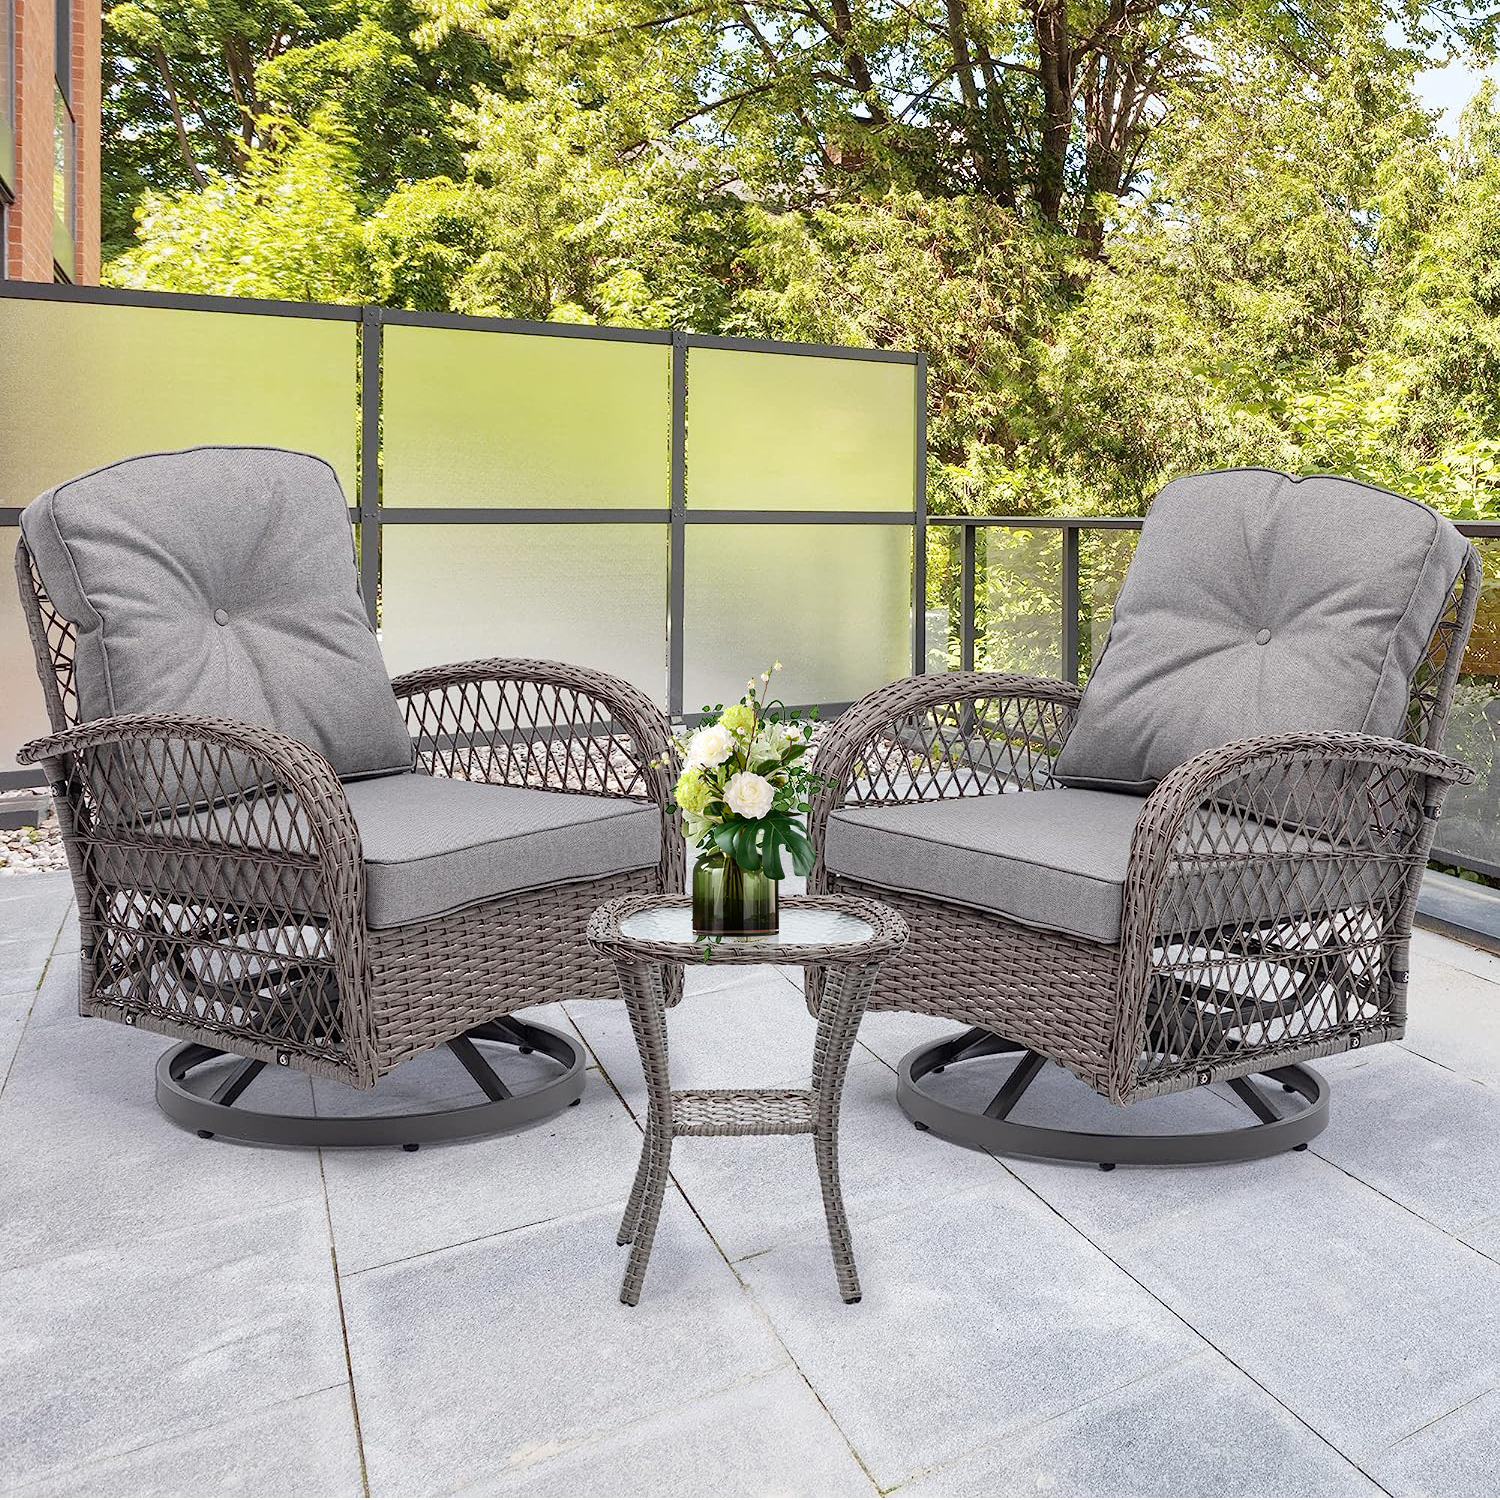 3-Piece Patio Bistro Furniture Set, 360° Patio Rattan Wicker Swivel Rocking Chair Set with Thickened Cushions and Glass Coffee Table, 275 LBS, Grey - image 1 of 10